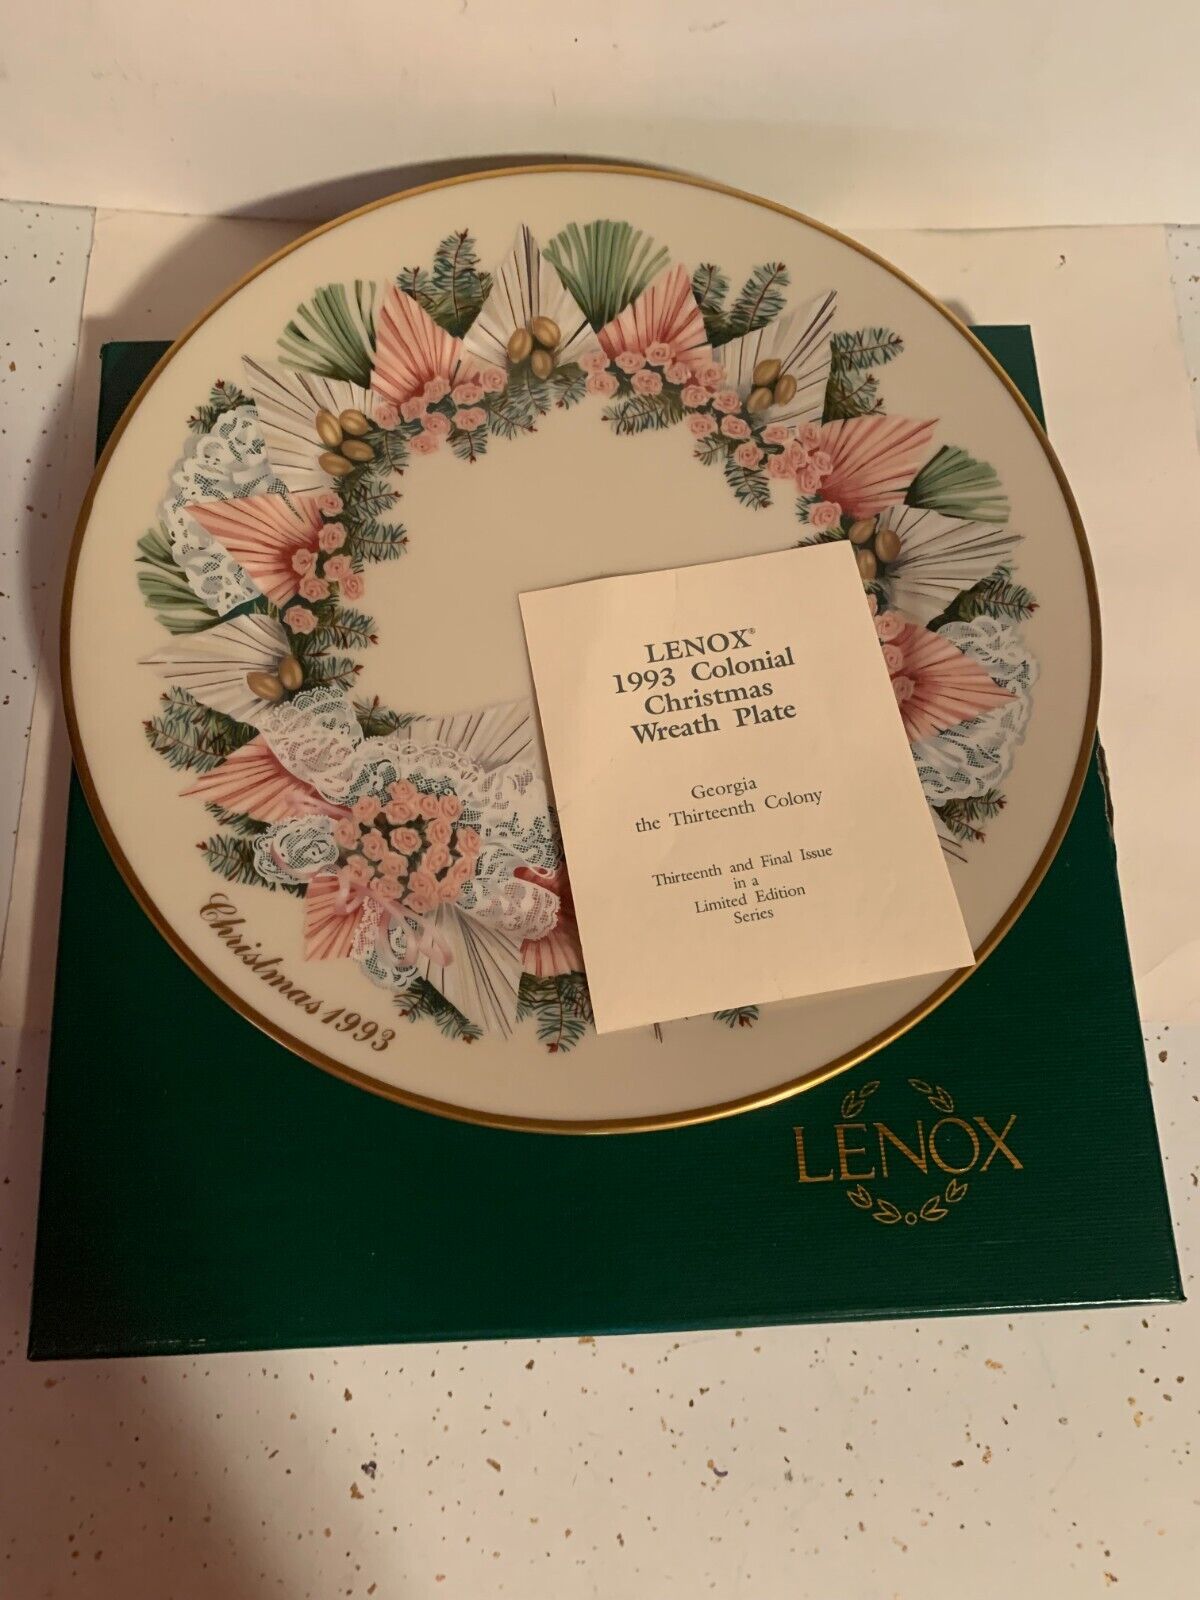 LENOX 1993 COLONIAL CHRISTMAS WREATH PLATE Georgia 13th and Final Issue Plate